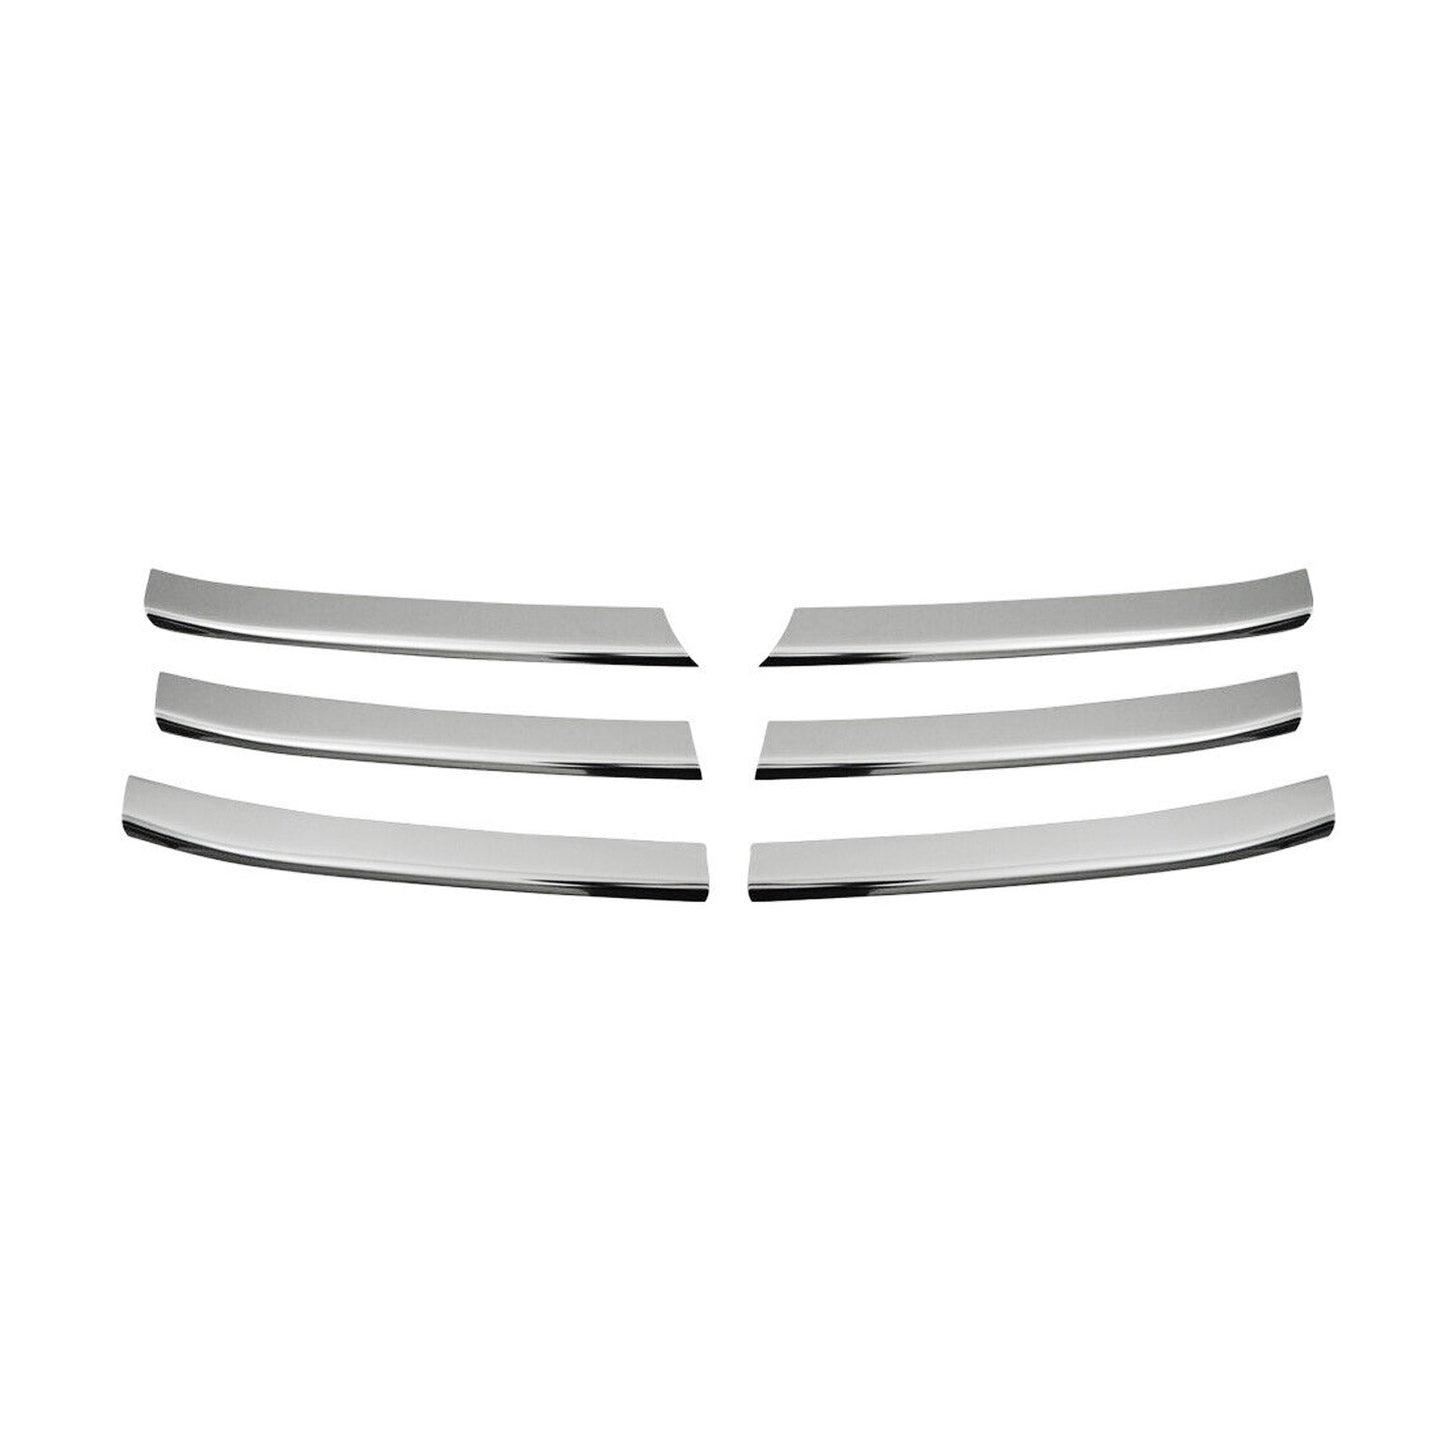 OMAC Front Bumper Grill Trim Molding for VW T5 Caravelle 2003-2010 Steel Silver 6 Pcs 7525081